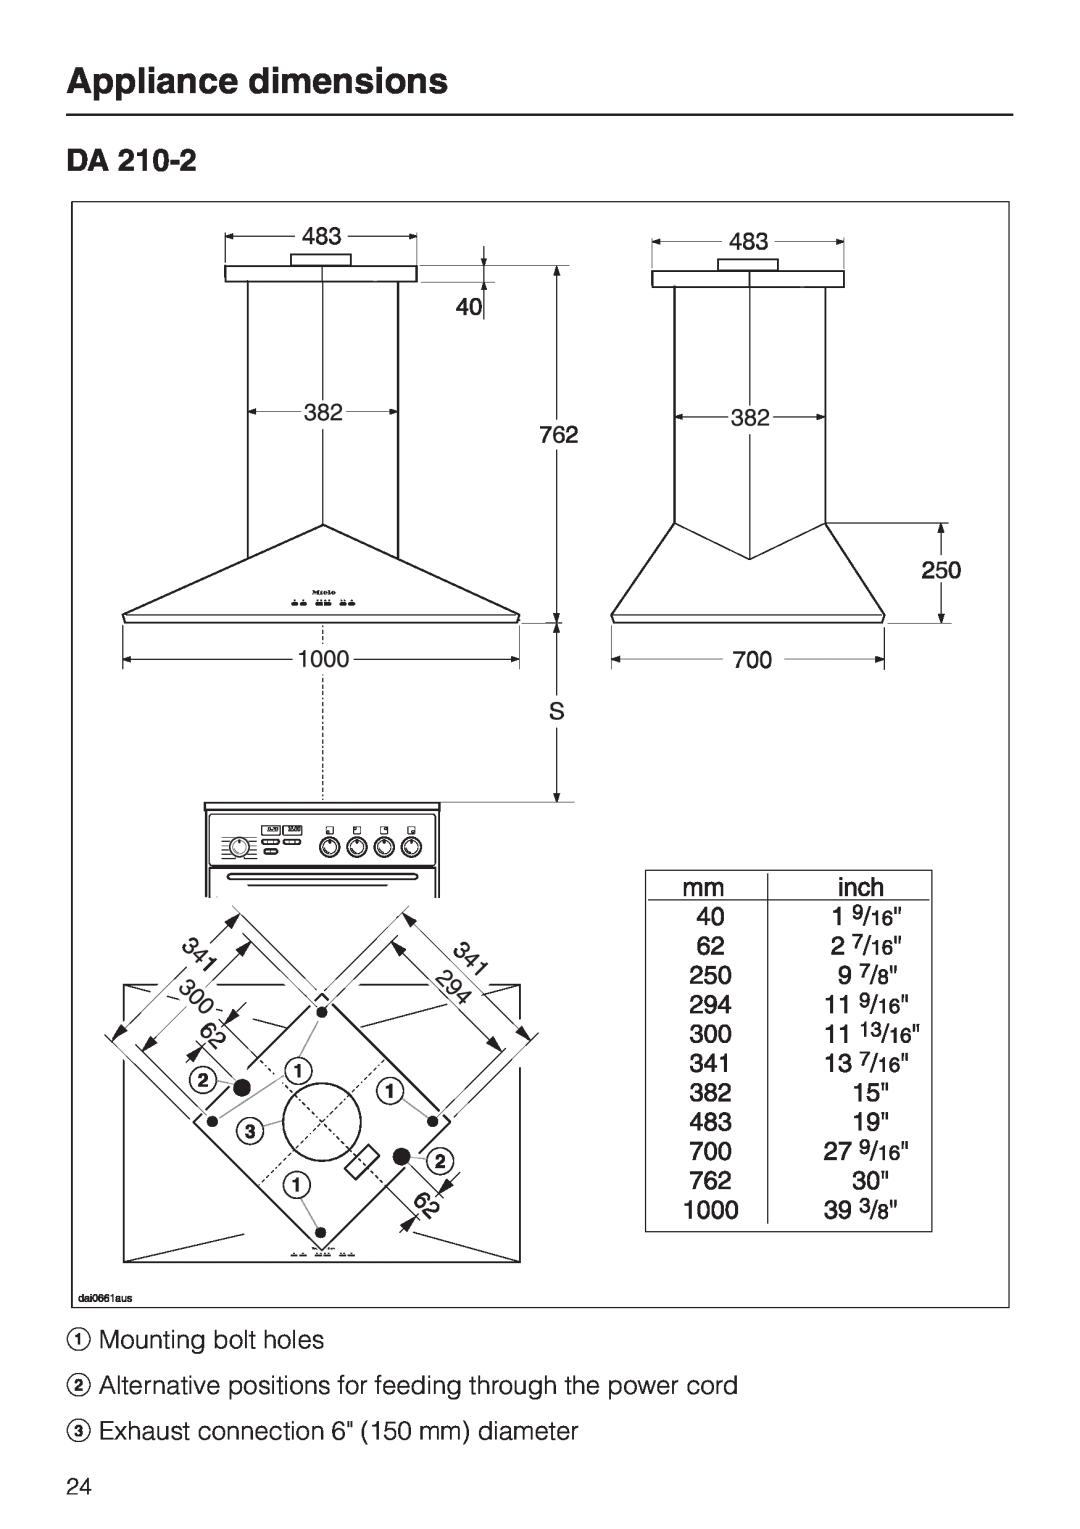 Miele DA210-3 installation instructions Appliance dimensions, aMounting bolt holes, cExhaust connection 6 150 mm diameter 